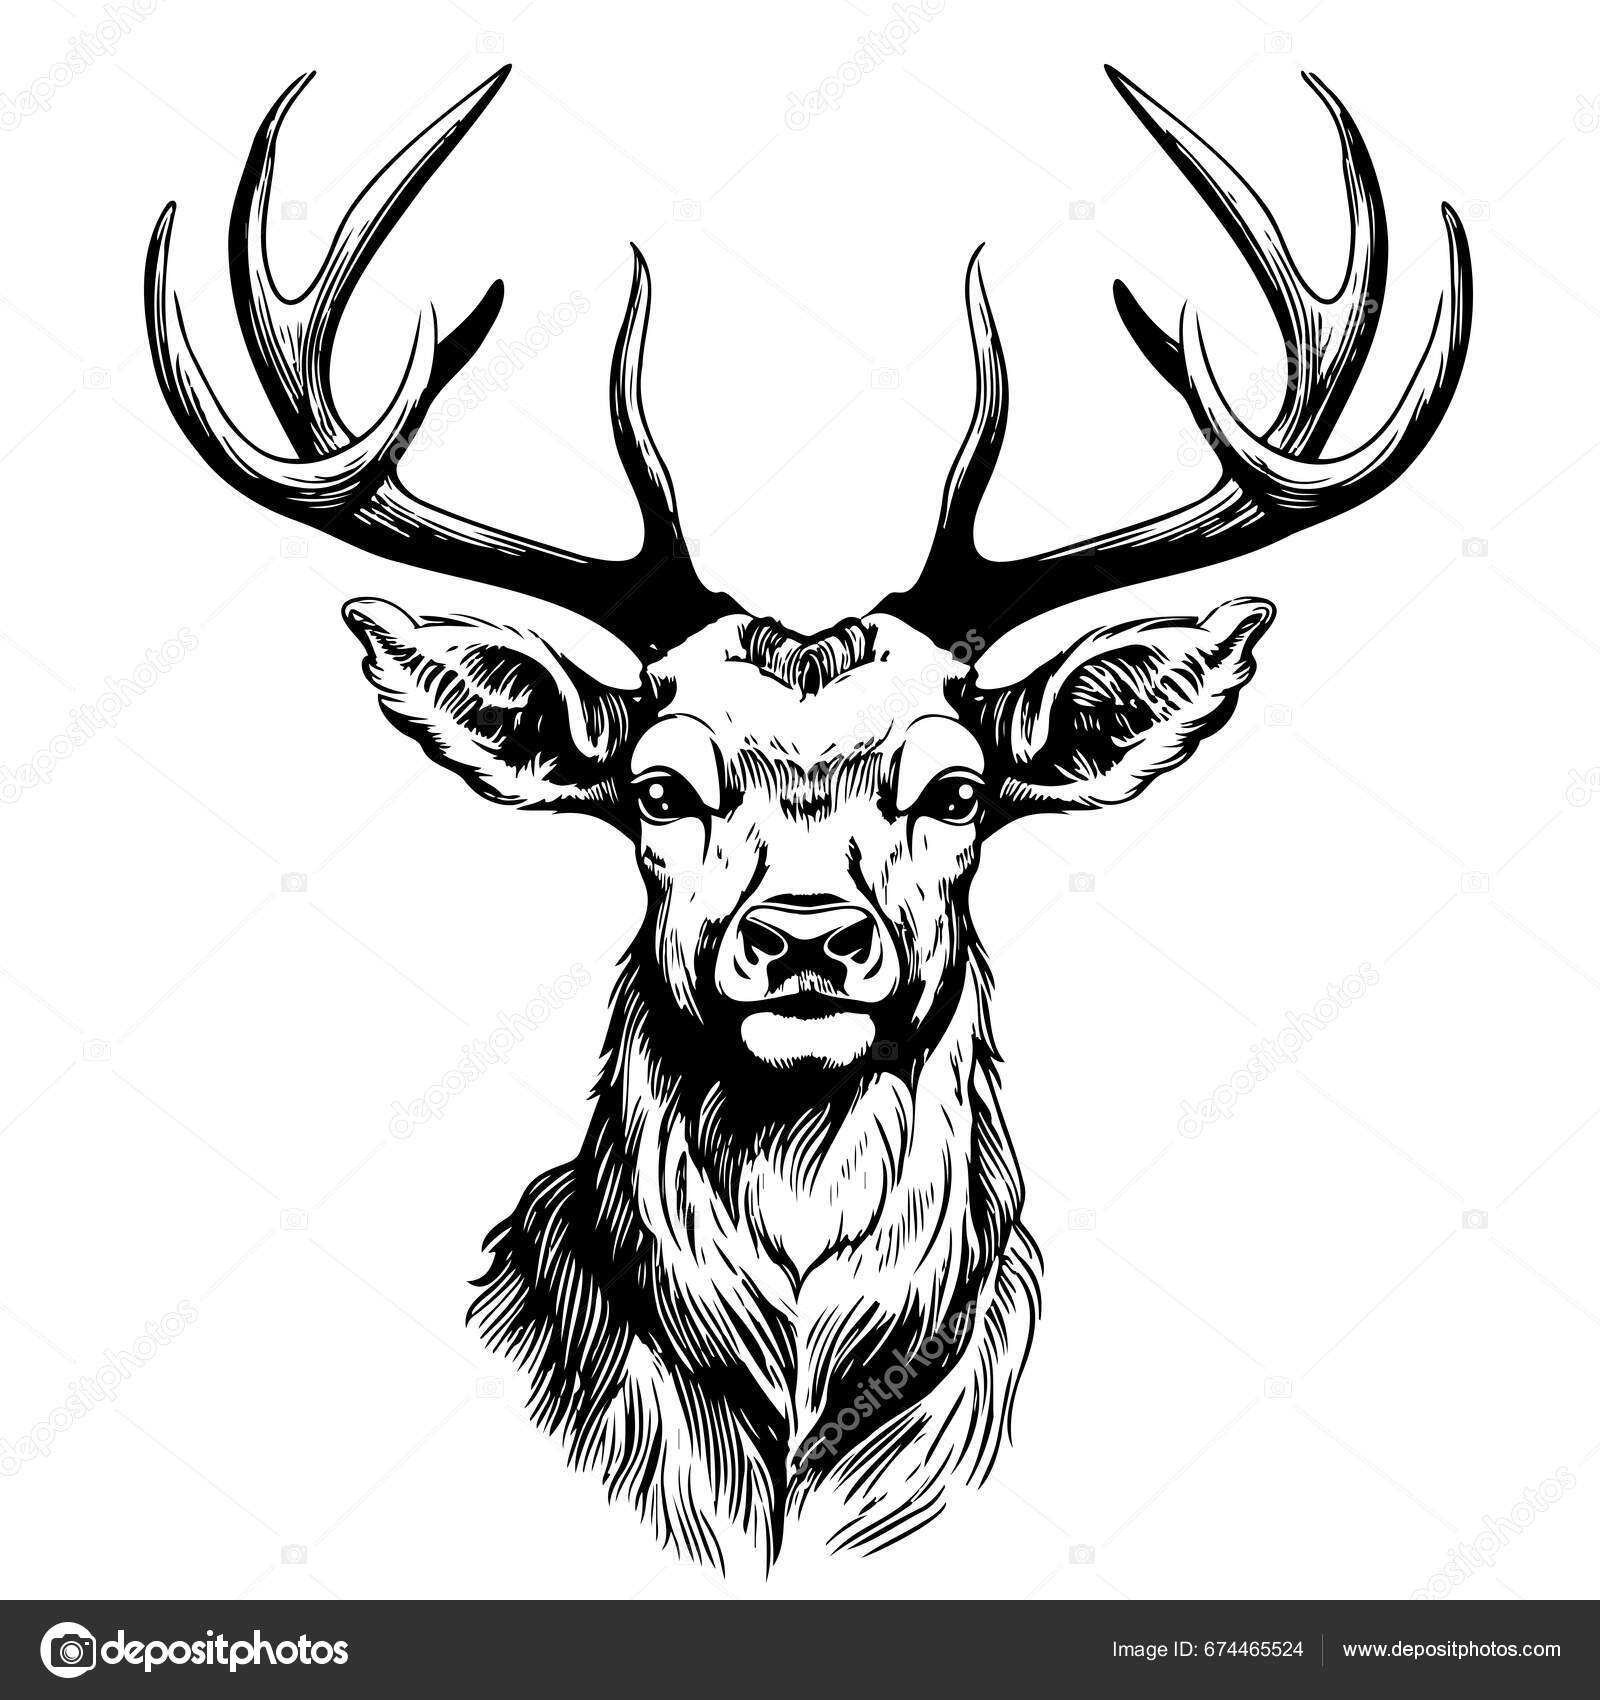 how to draw a deer head easy for beginners - YouTube